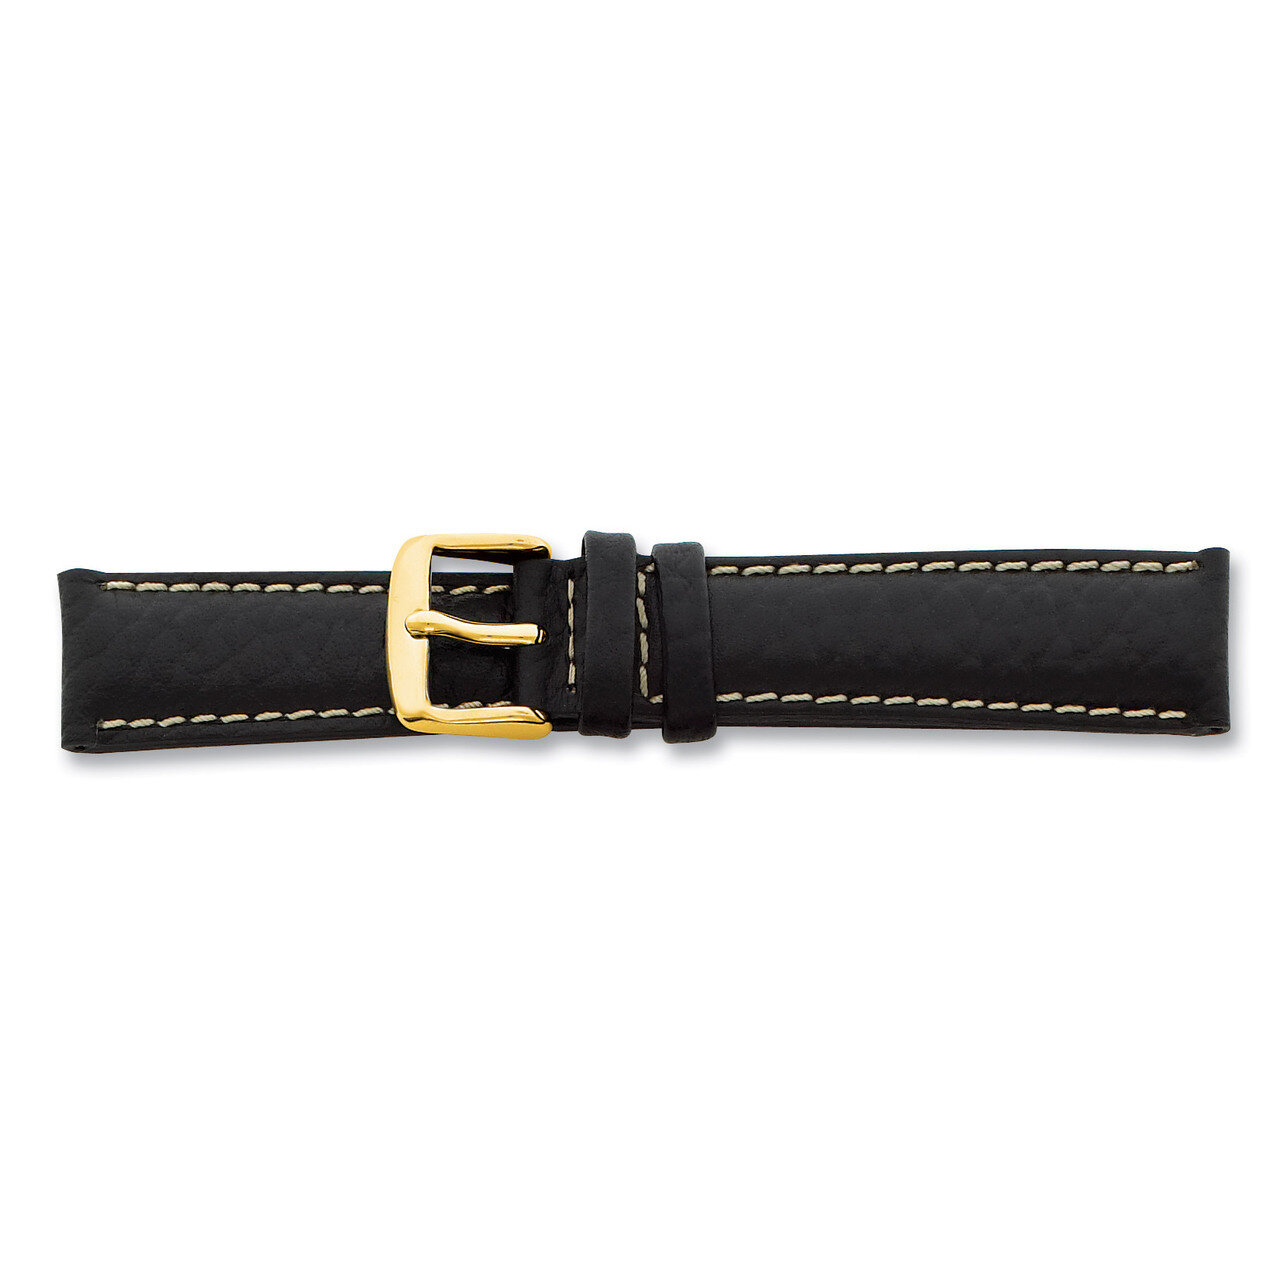 14mm Black Leather White Stitch Buckle Watch Band 6.75 Inch Gold-tone BAY99-14